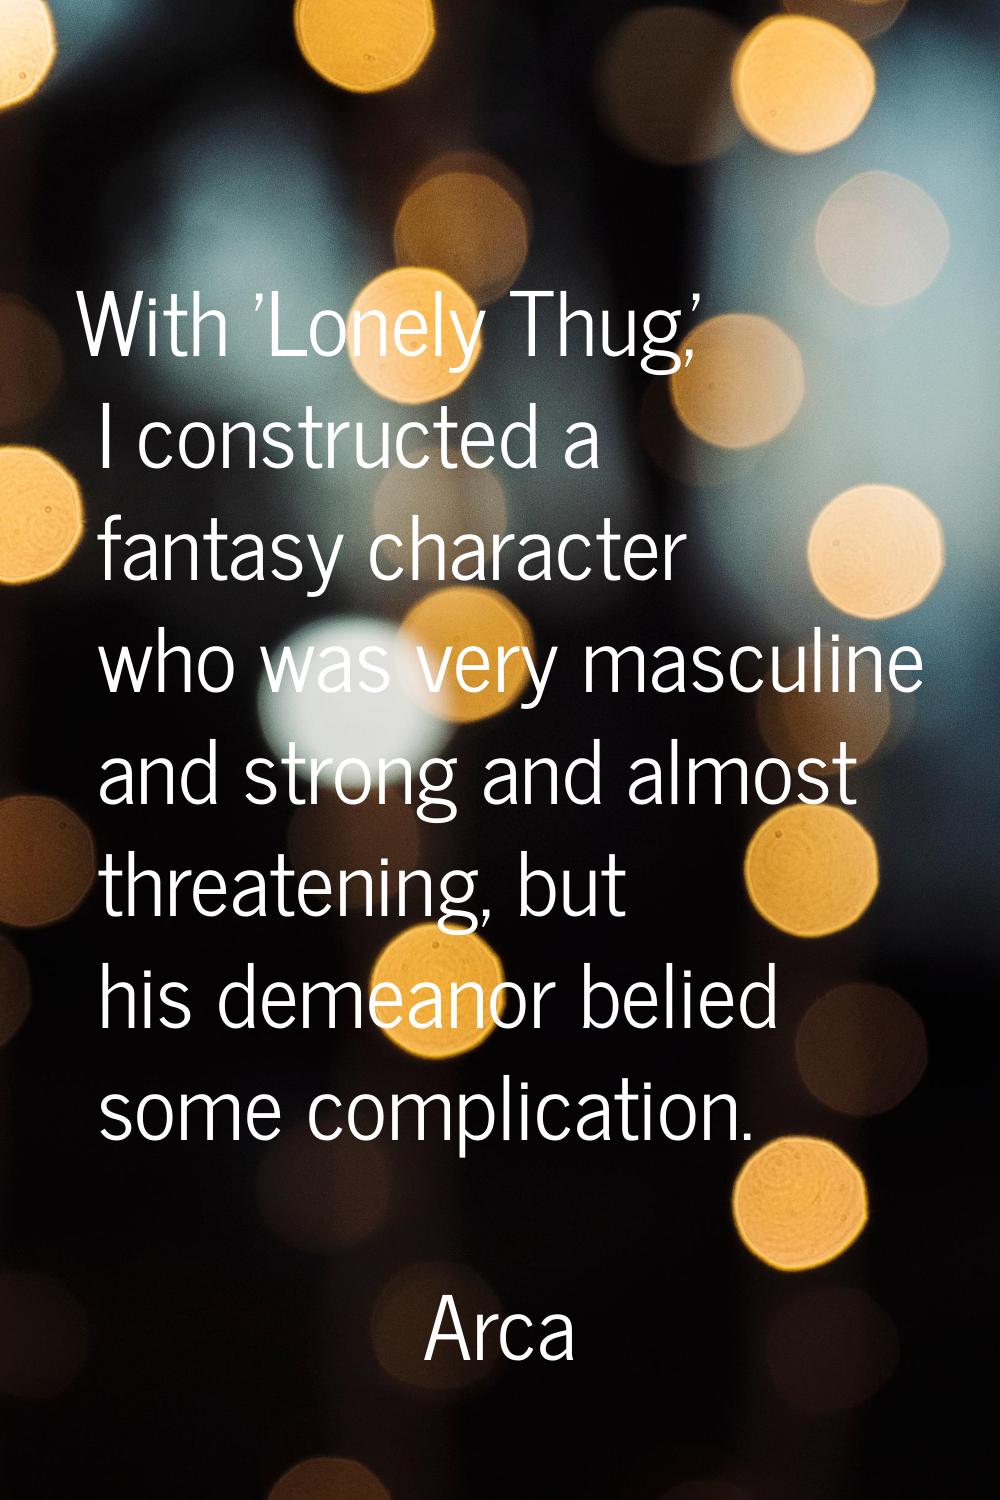 With 'Lonely Thug,' I constructed a fantasy character who was very masculine and strong and almost 